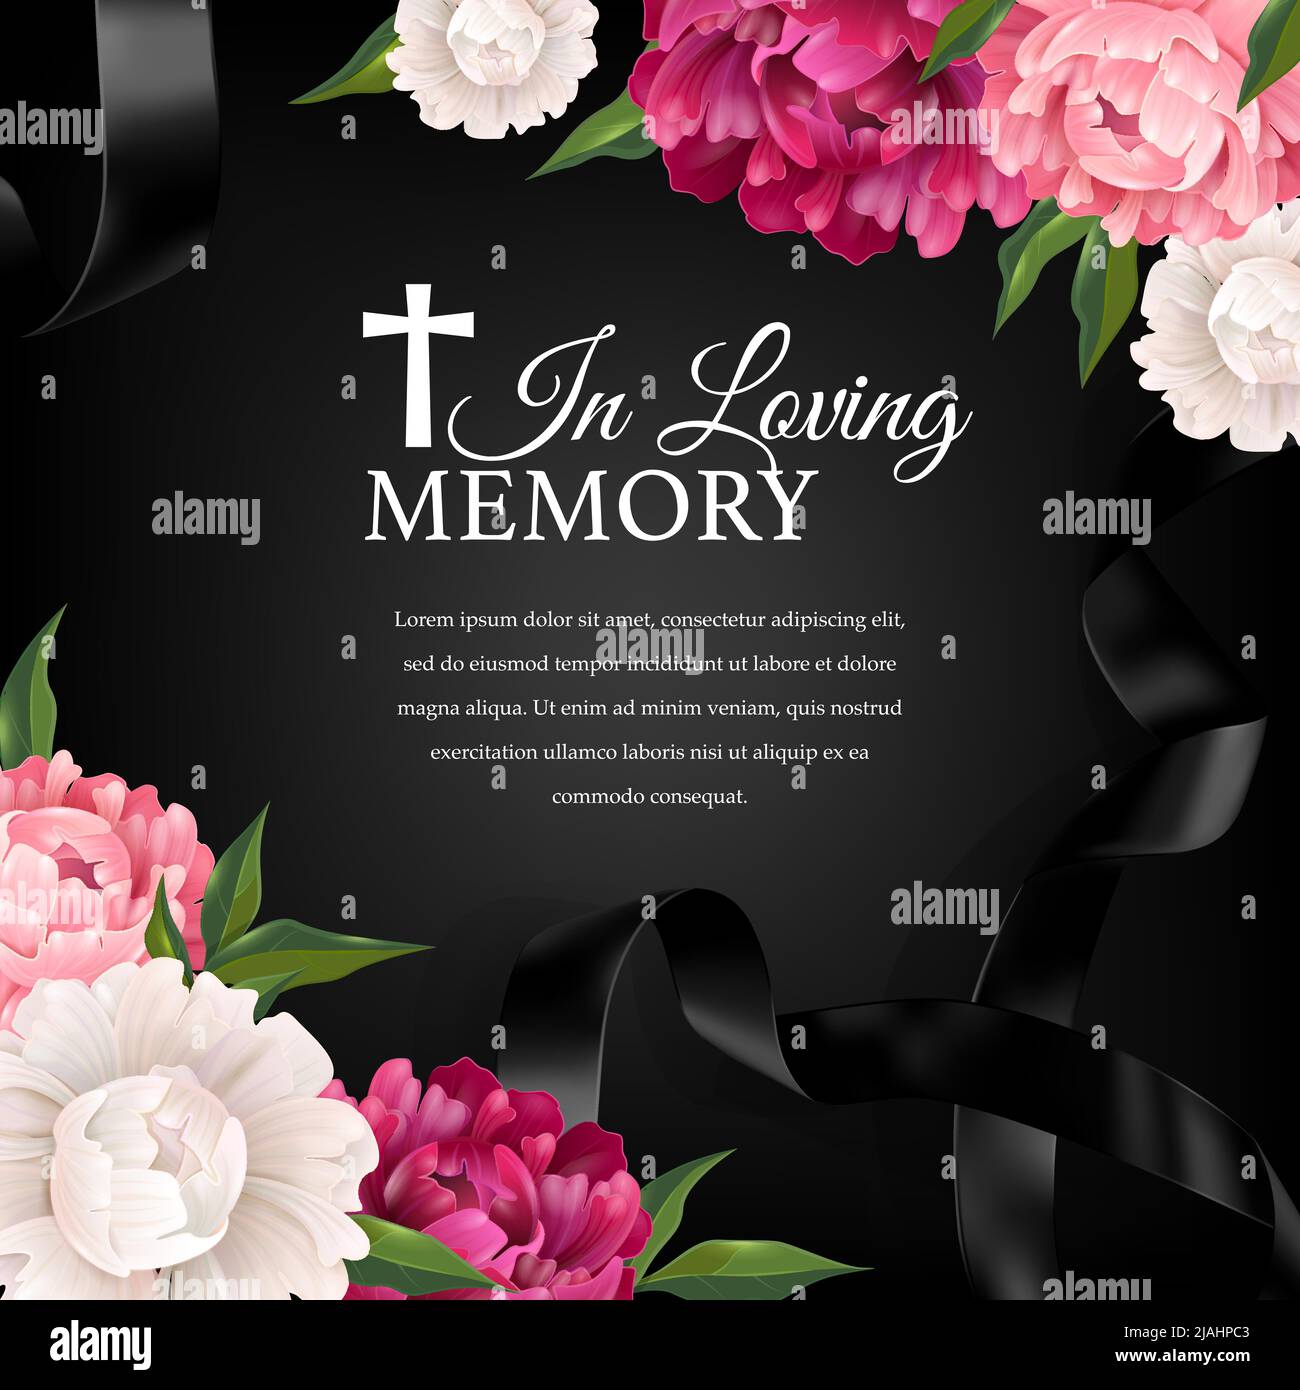 In loving memory background composition with flowers black ribbon and funeral cross with editable condolences text vector illustration Stock Vector